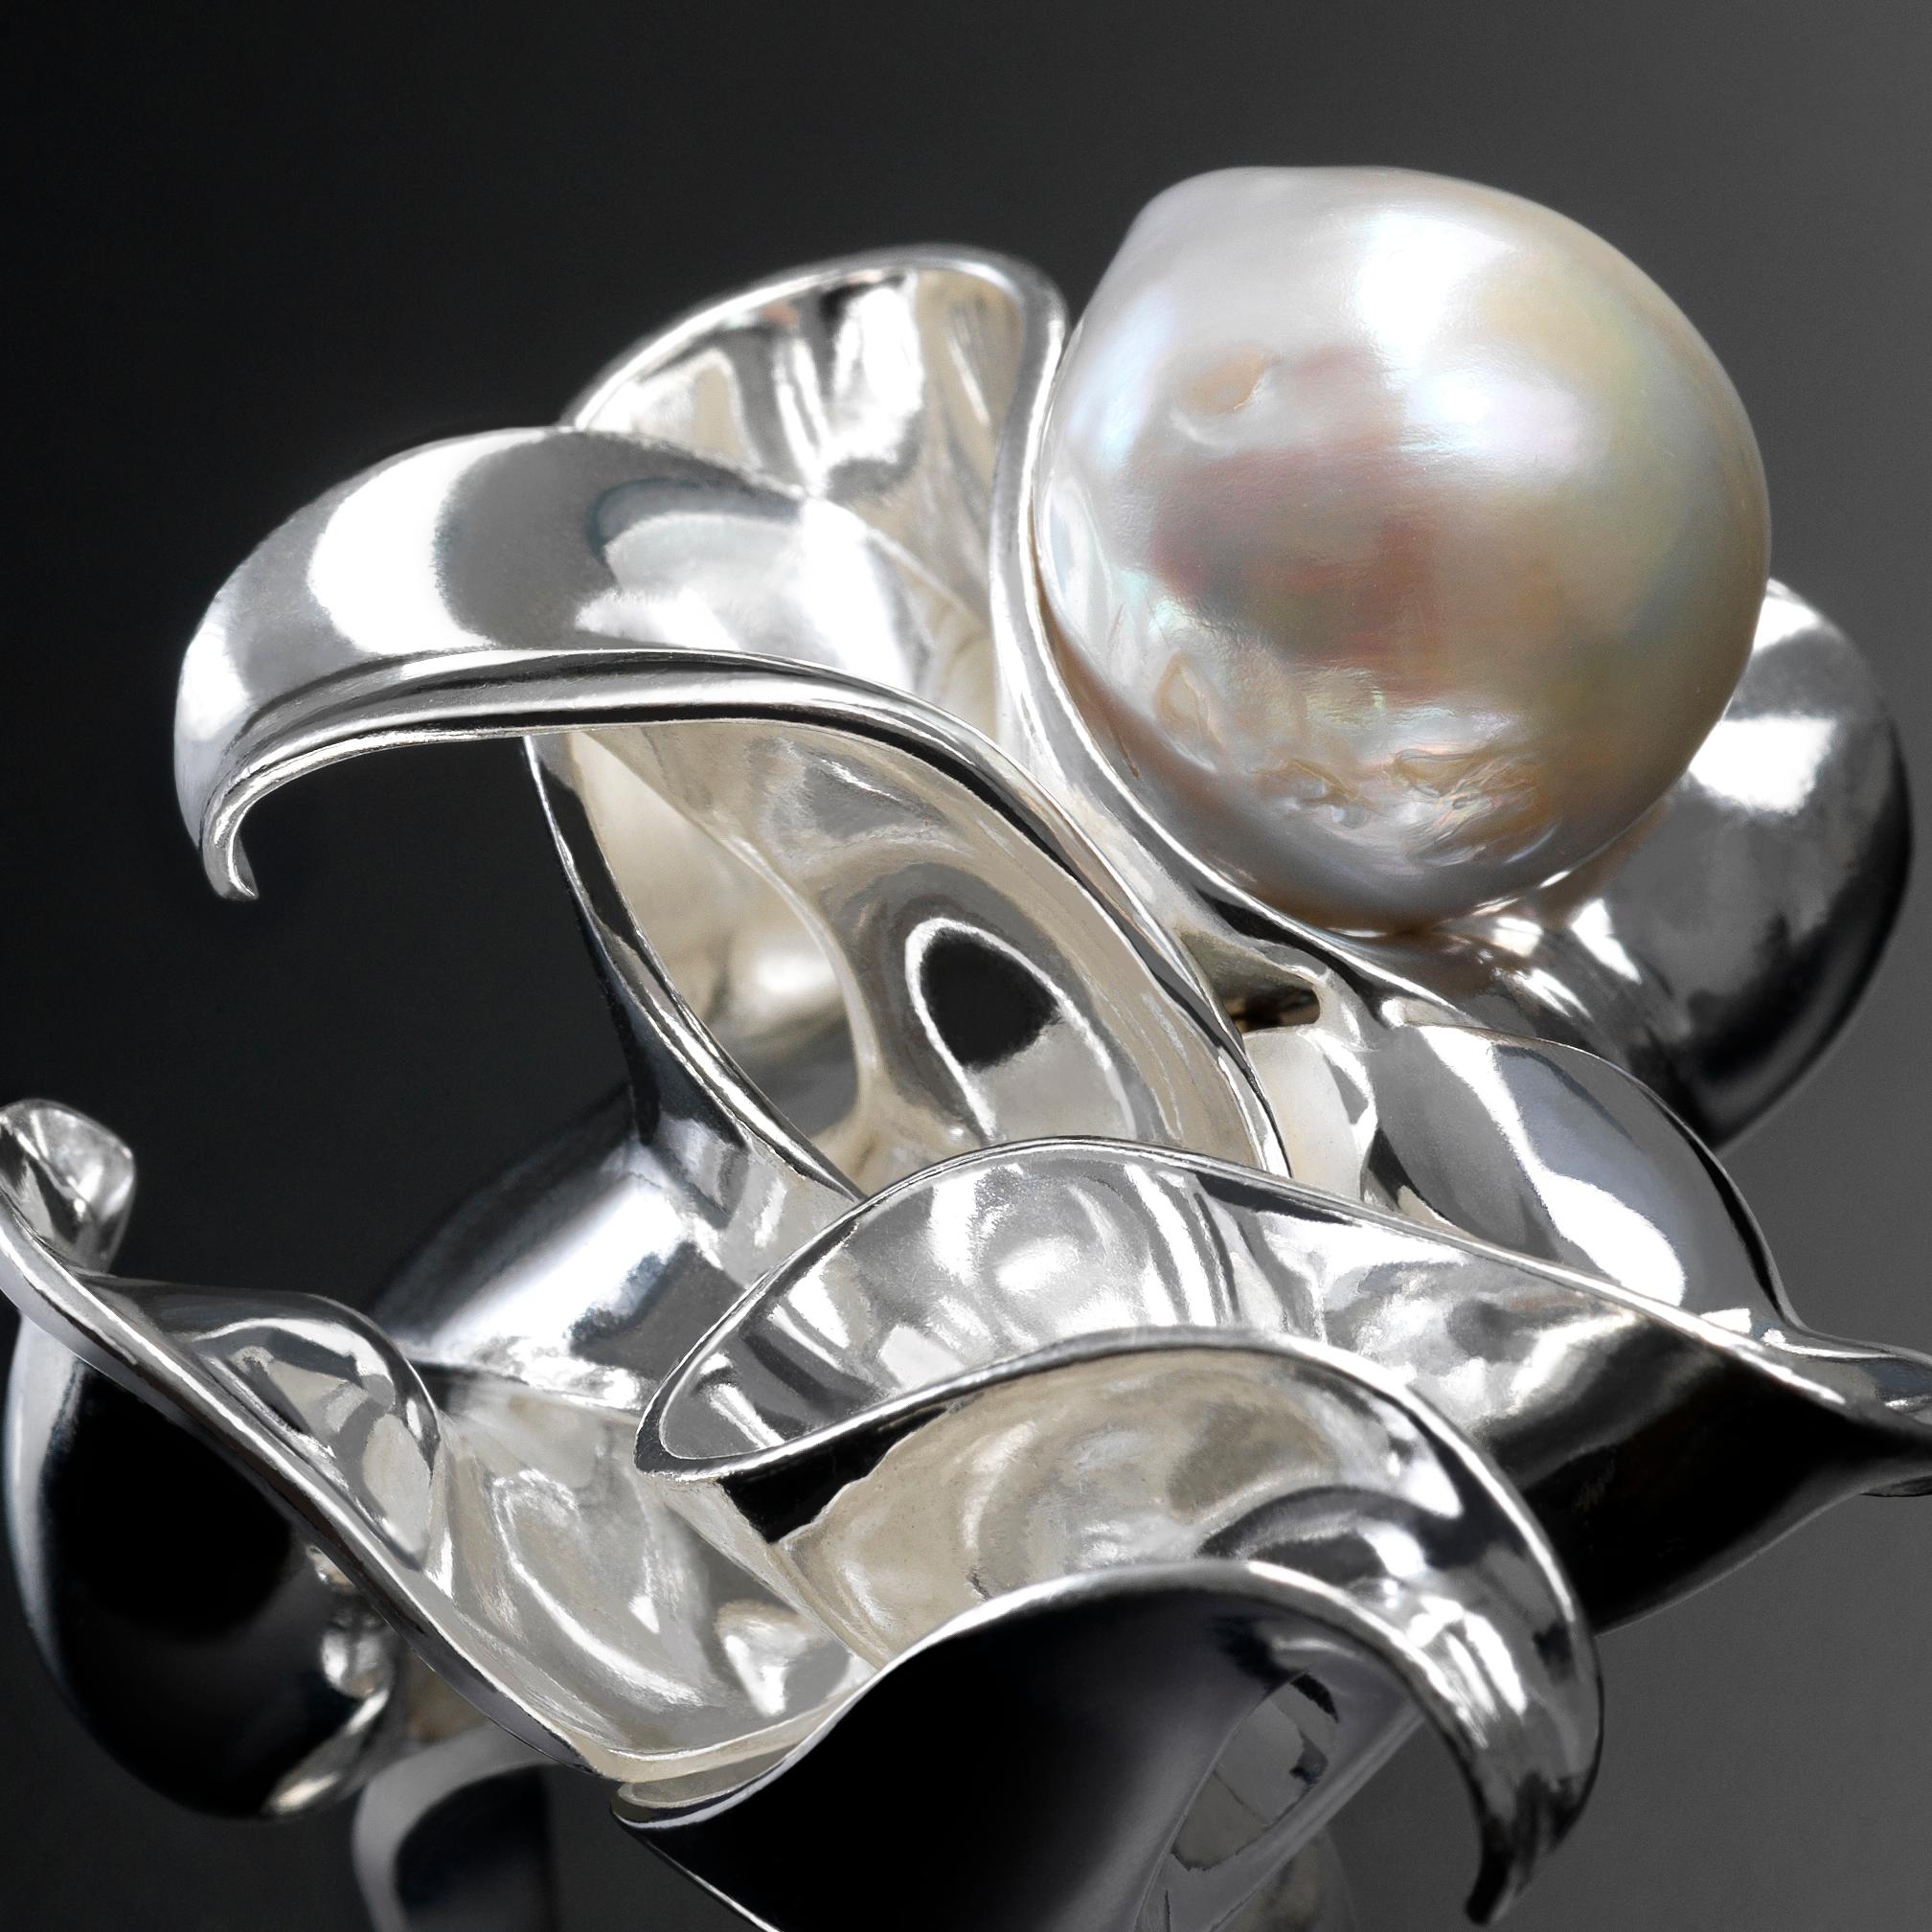 With their delicate, curved, free-form surfaces, the elements of this sculptural statement ring in sterling silver fold and unfold with harmony and grace like shell fragments or metalized leaves. Cleverly fit one into the other, the undulating